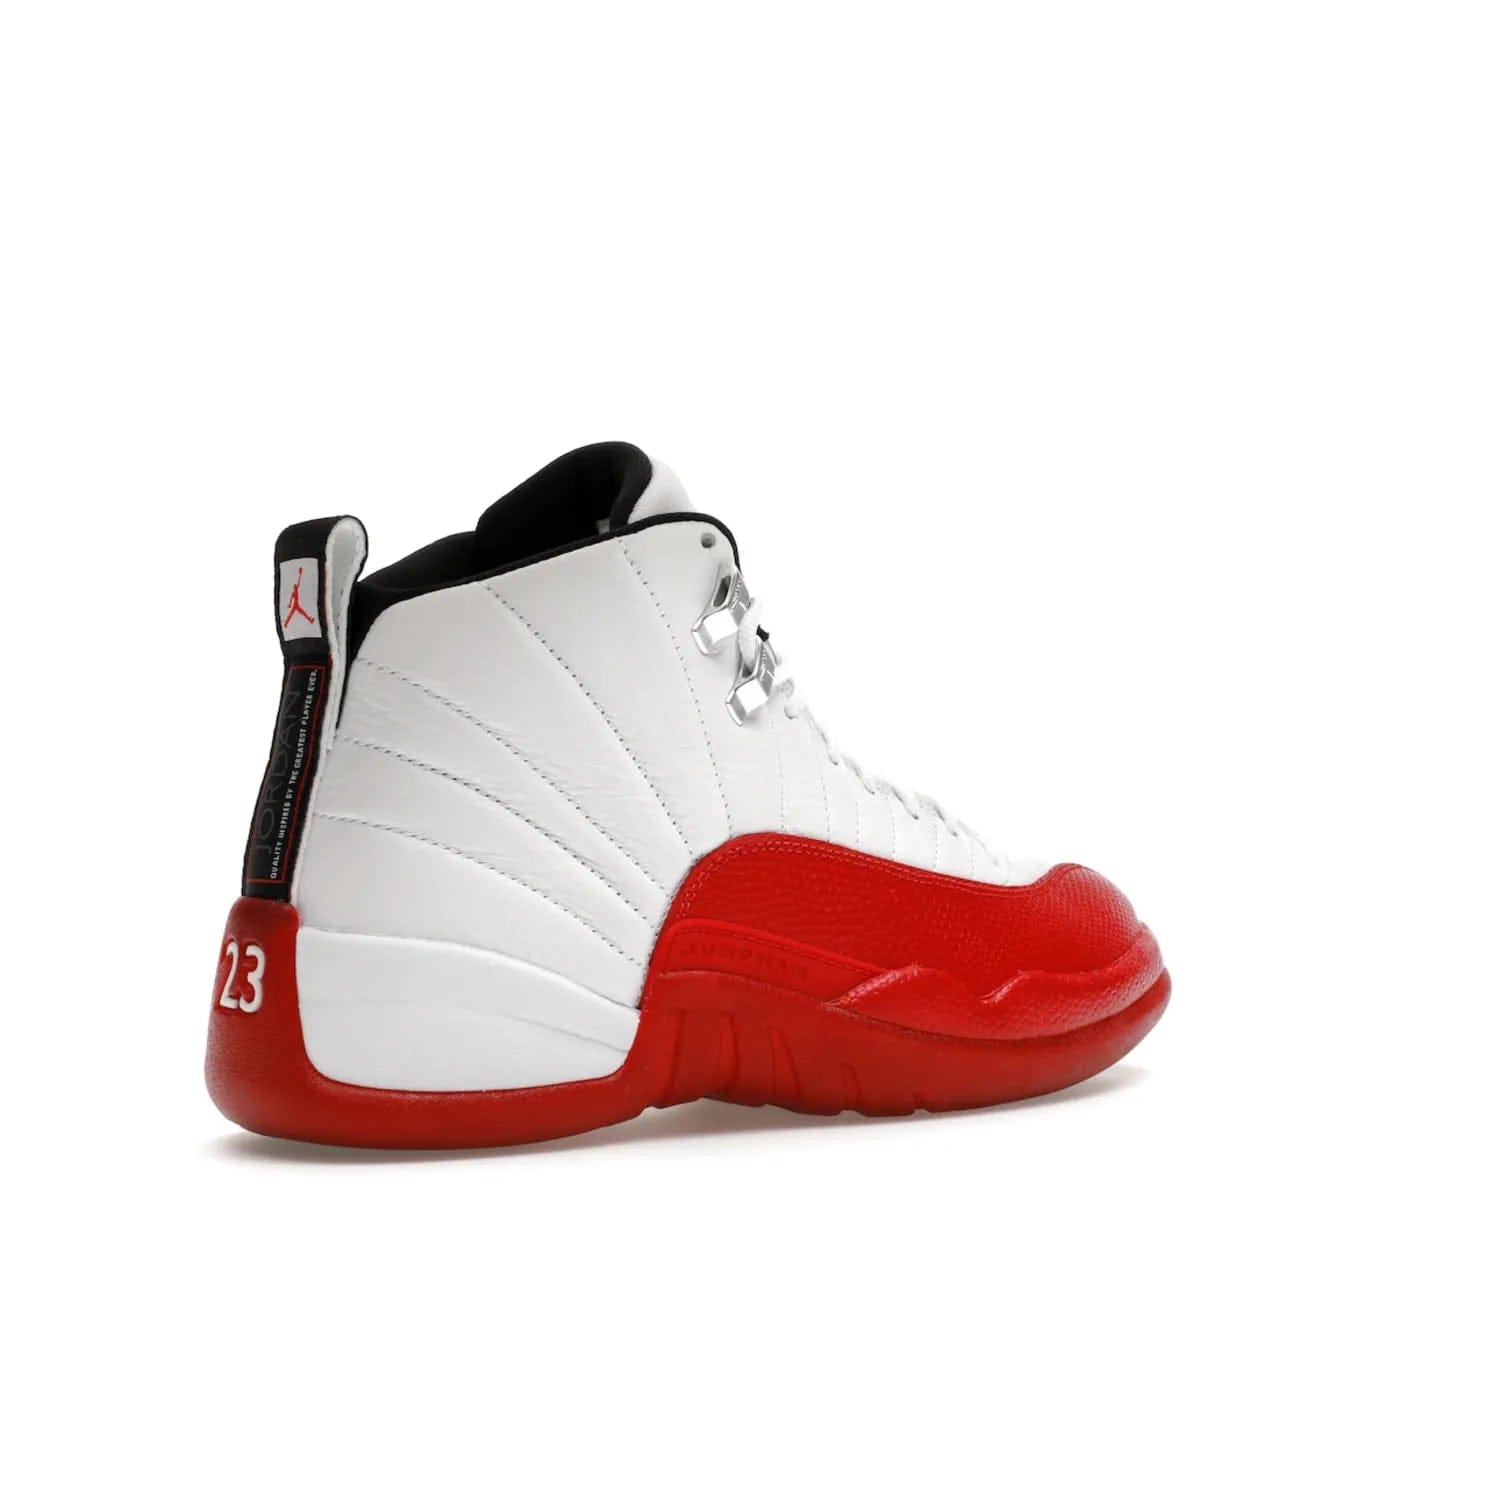 Jordan 12 Retro Cherry (2023) - Image 33 - Only at www.BallersClubKickz.com - Live your sneaker legend with the Jordan 12 Retro Cherry. Iconic pebbled leather mudguards, quilted uppers, and varsity red accents make this 1997 classic a must-have for 2023. Shine on with silver hardware and matching midsoles, and bring it all together for limited-edition style on October 28th. Step into Jordan legacy with the Retro Cherry.